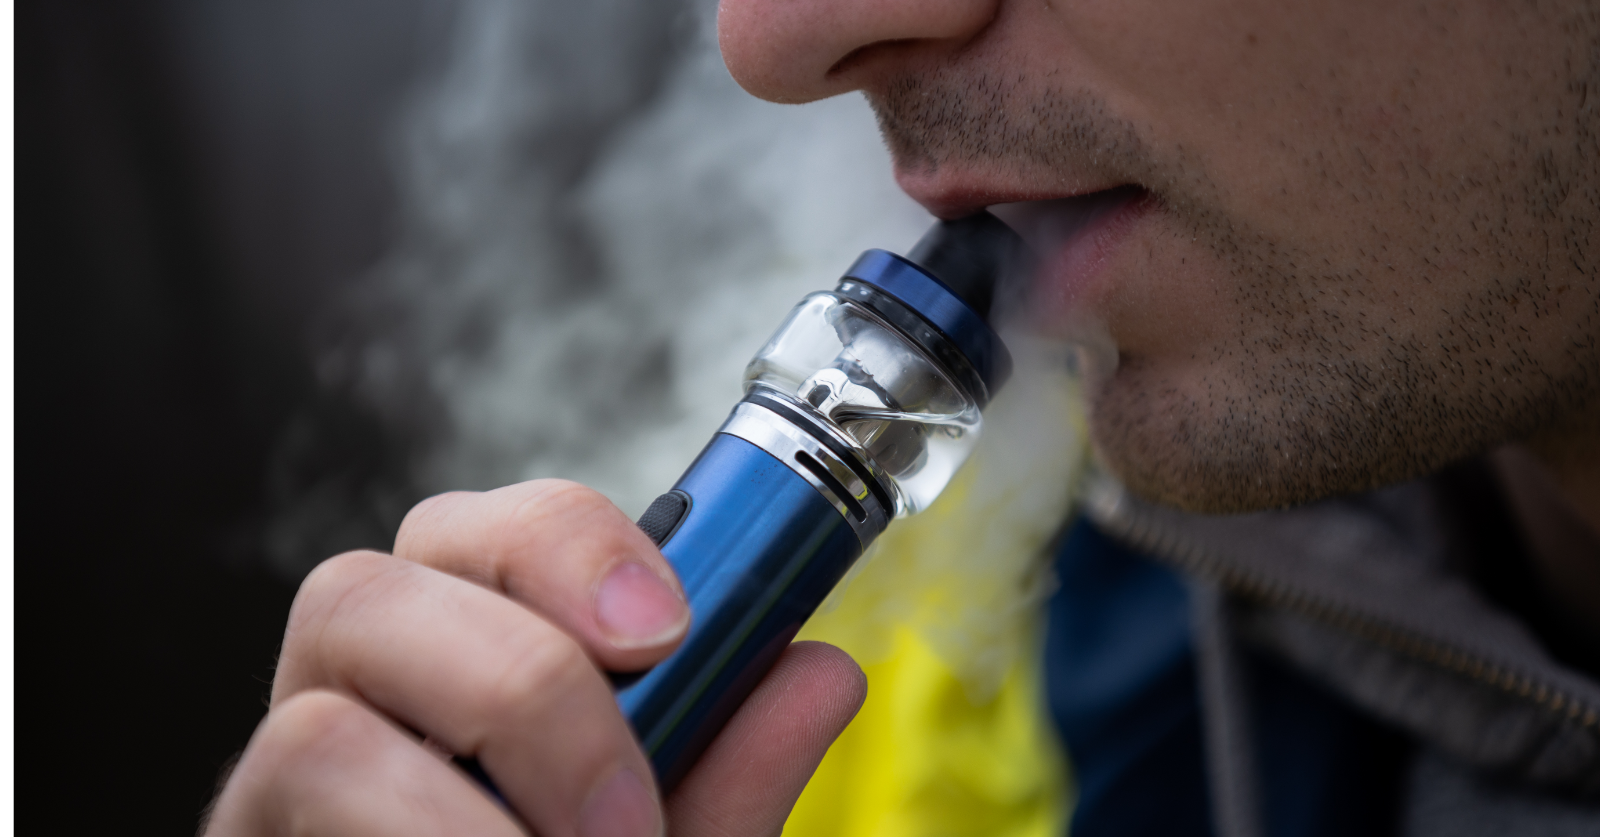 Large study finds e-cigarette users 19 percent more likely to develop heart failure